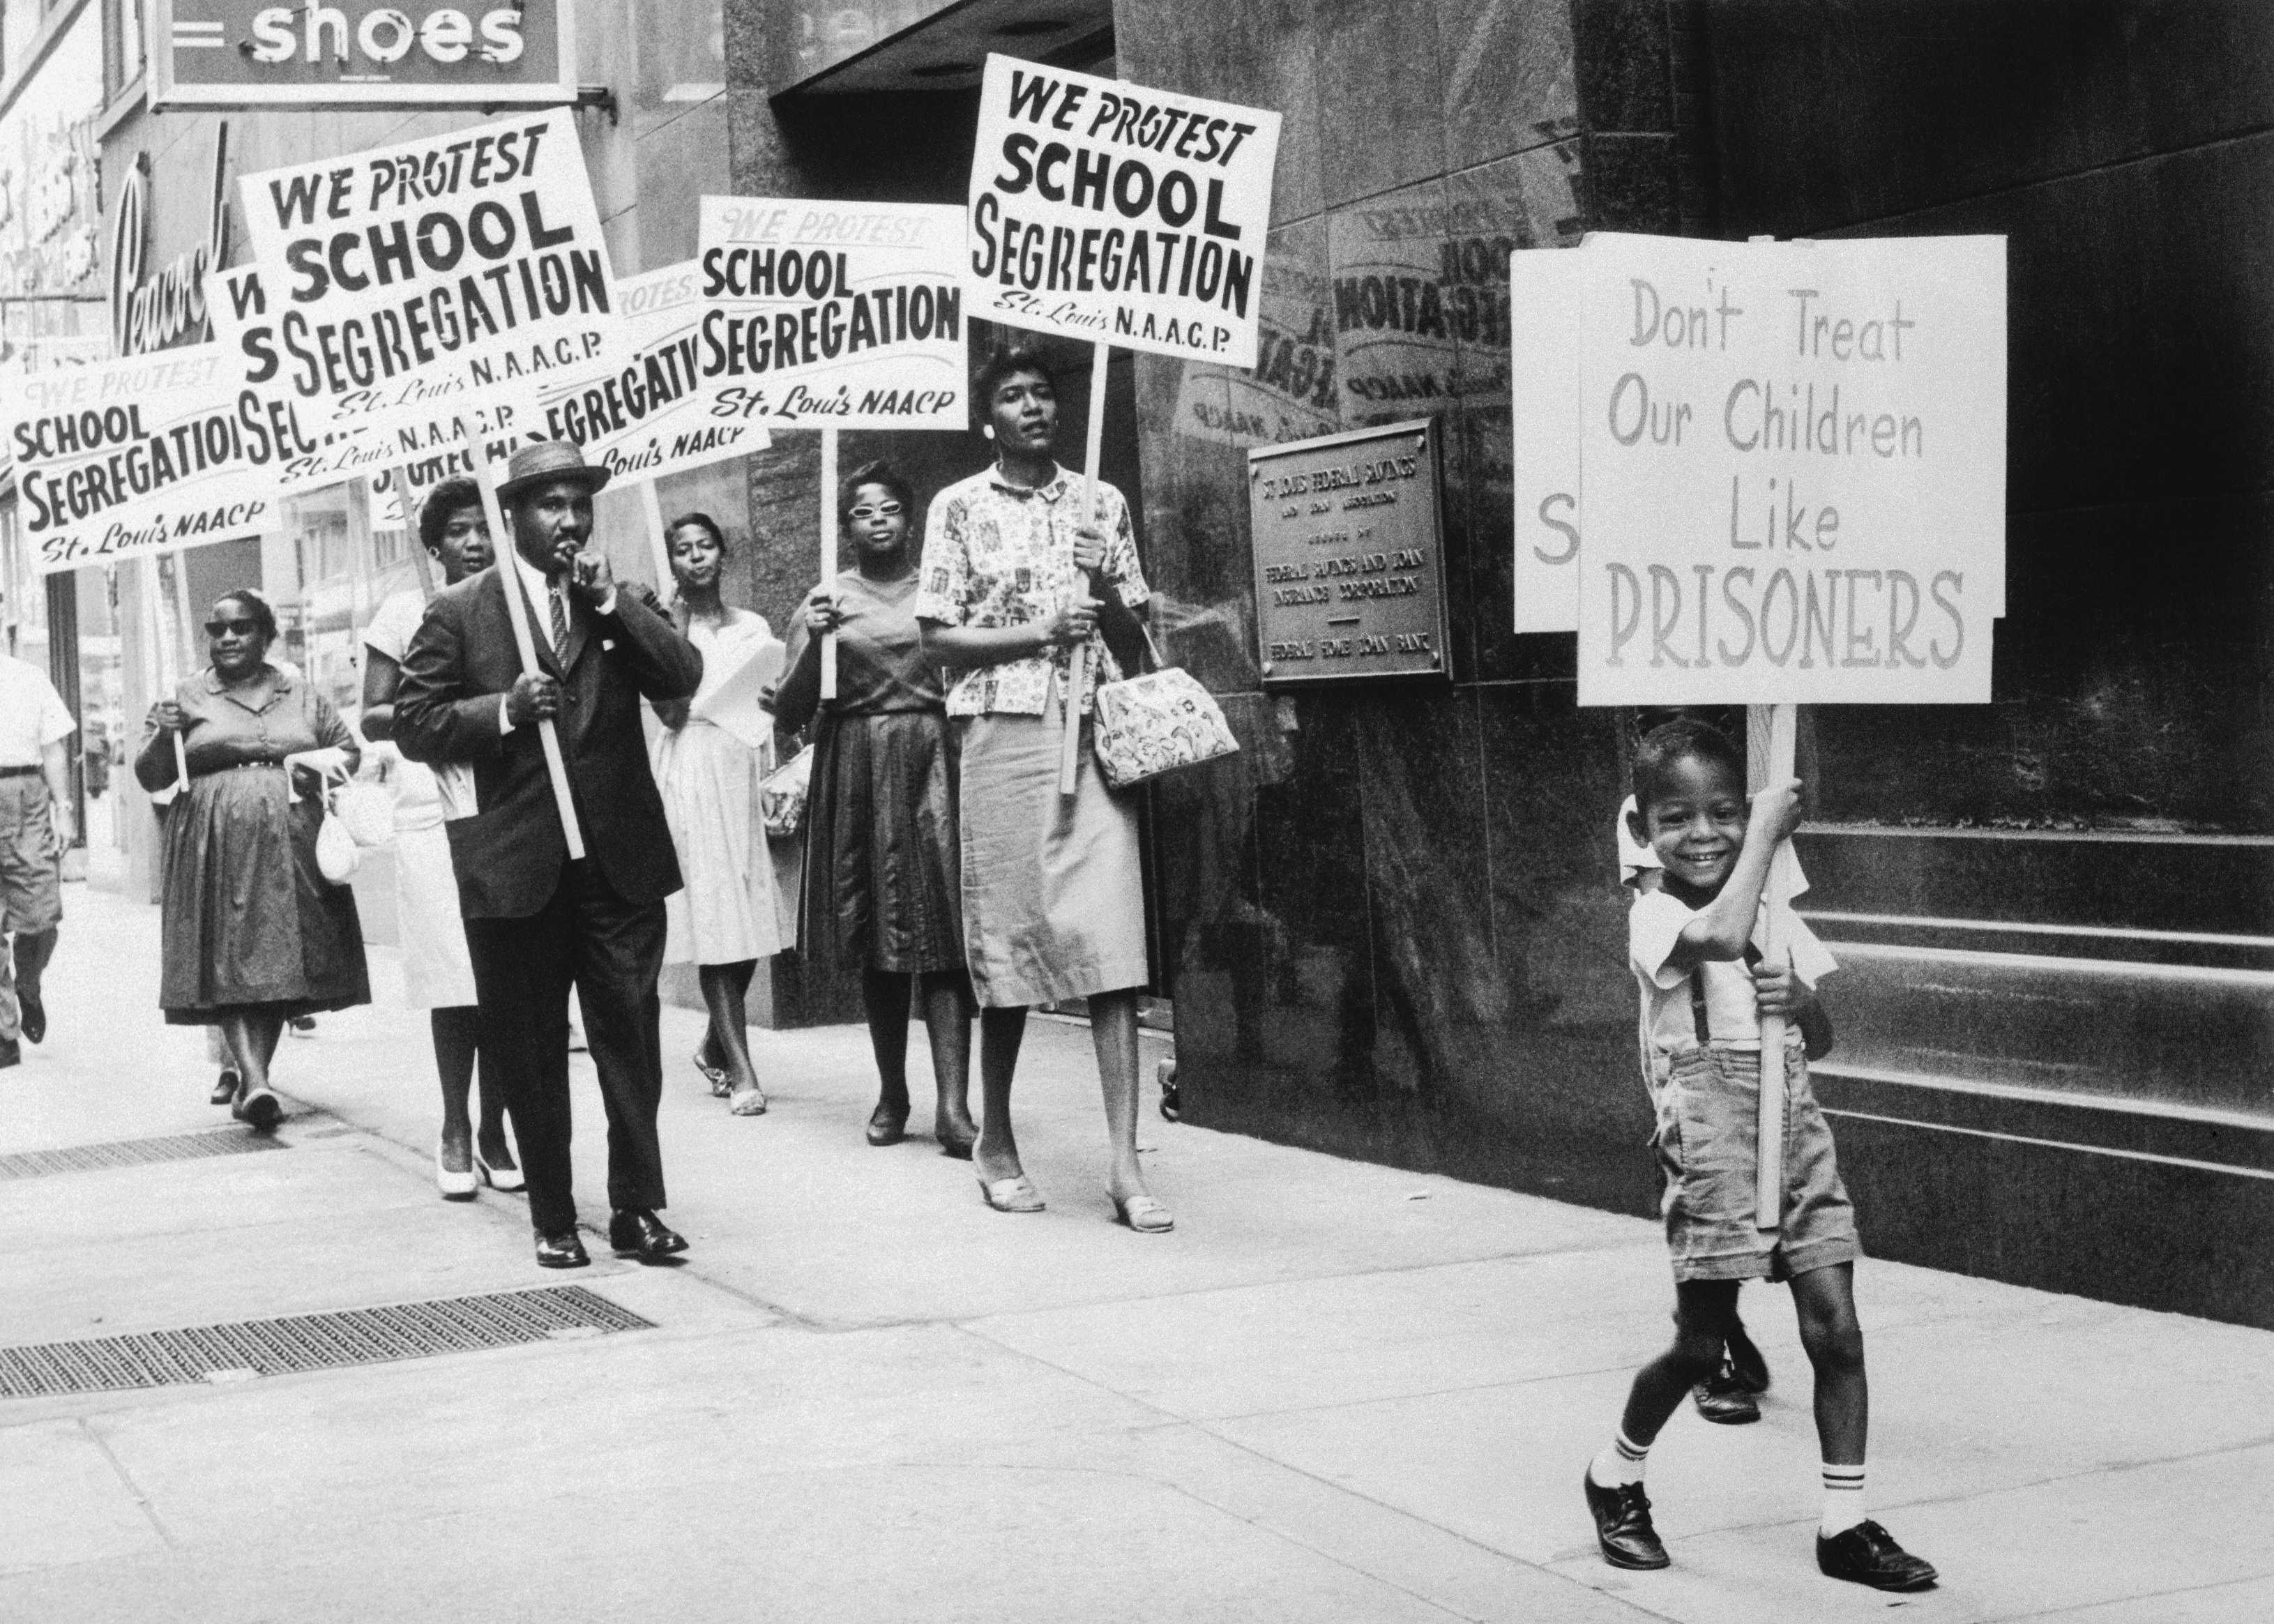 Black and white photograph of African Americans protesting school segregation sponsered by the St Louis NAACP.